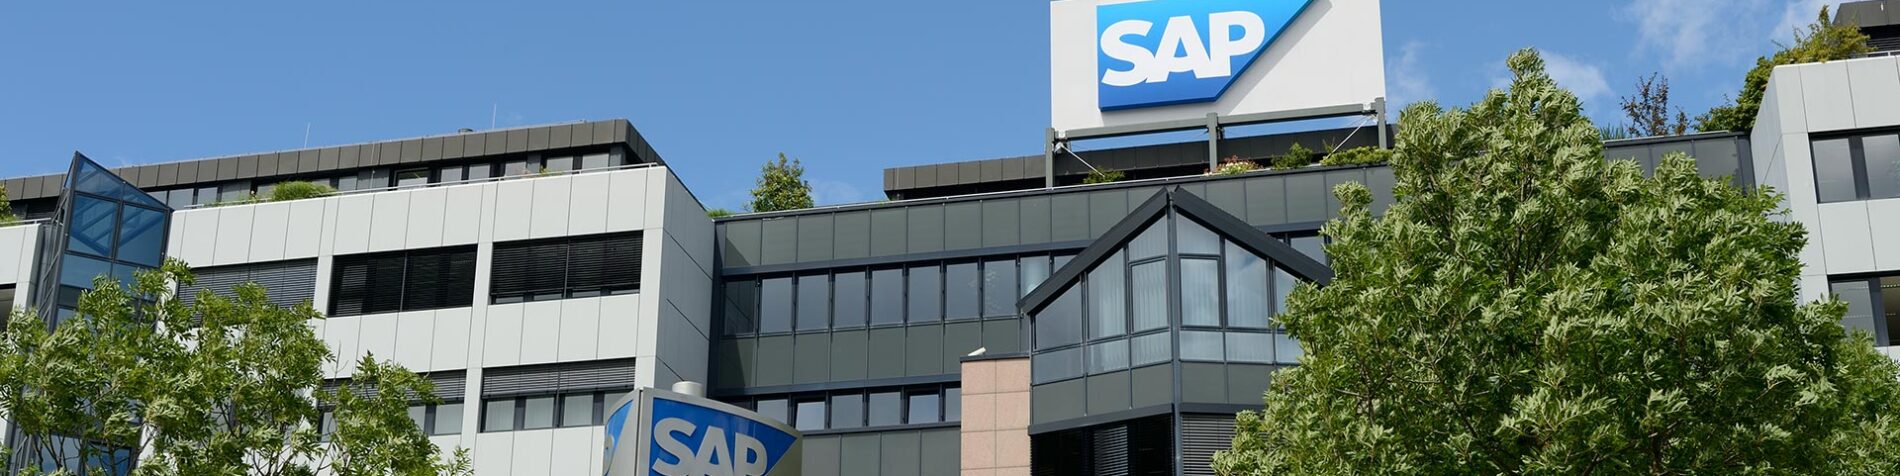 10 Reasons Why SAP is Right for Small Business (Plus 240,000 More)